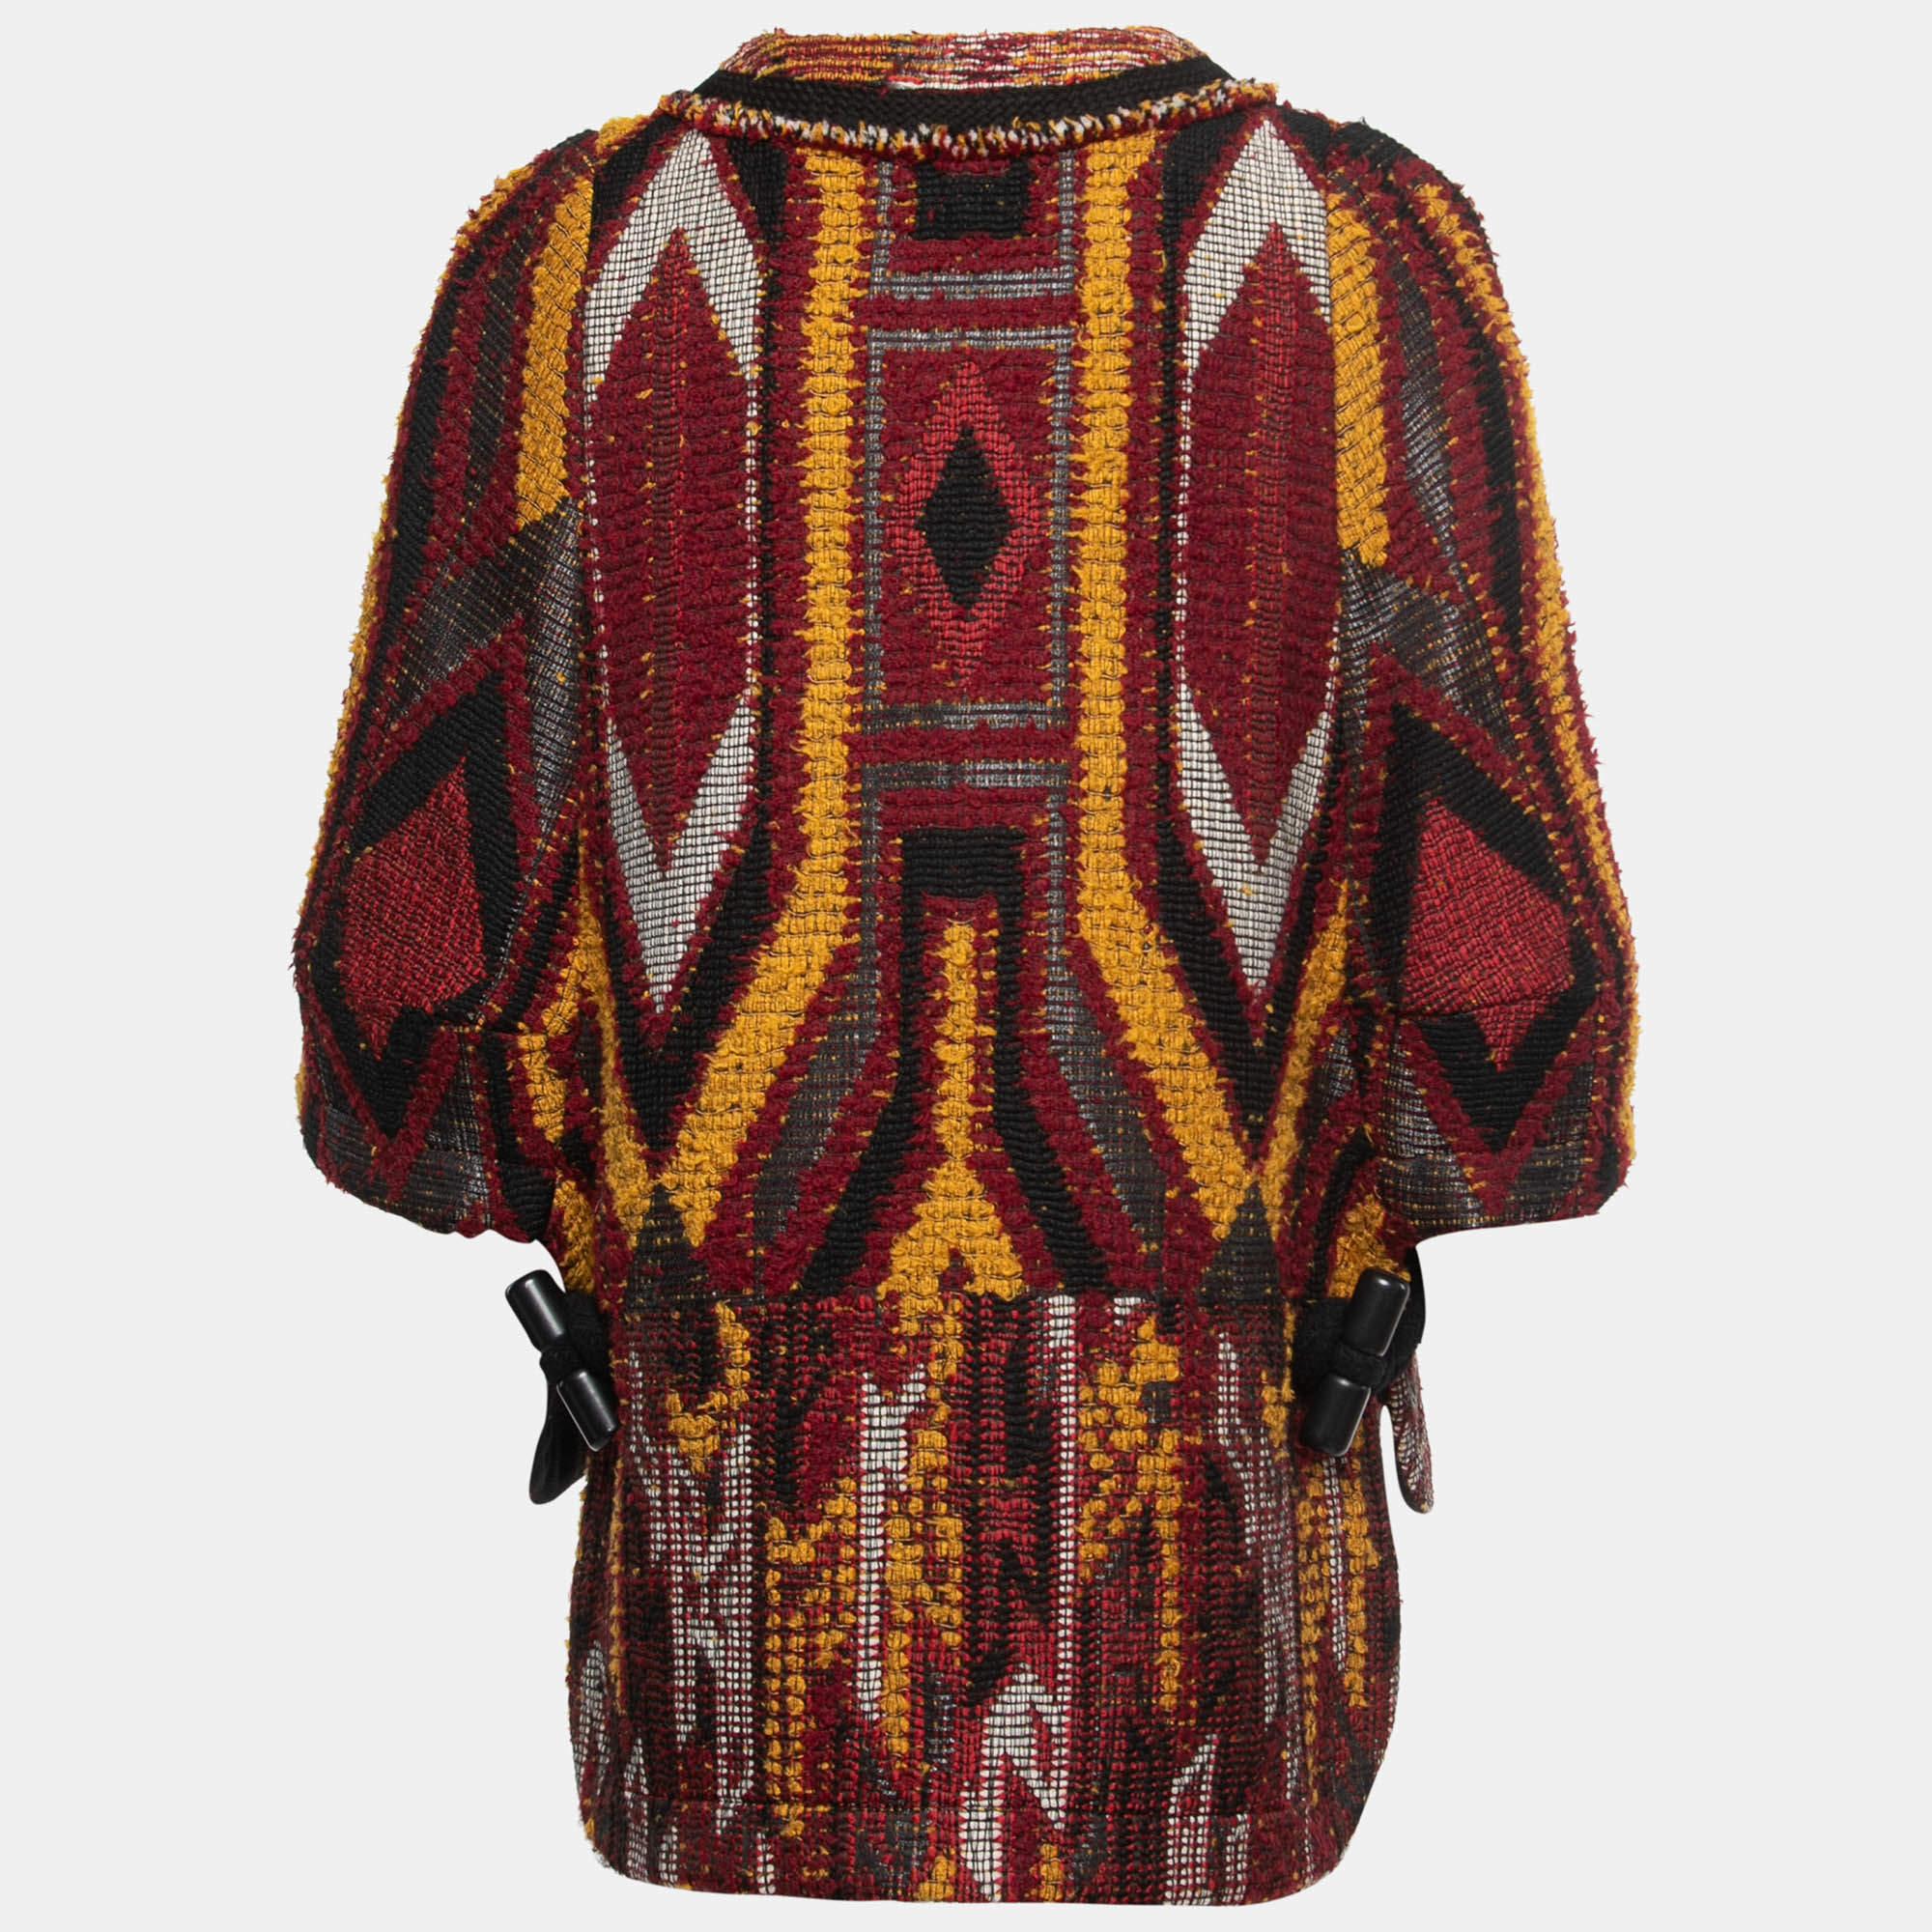 The Chloé coat is a stunning outerwear piece that combines style and warmth. This cape coat features a vibrant multicolor tribal pattern woven into a textured boucle tweed fabric. With its relaxed cape silhouette and intricate design, it's a fashion